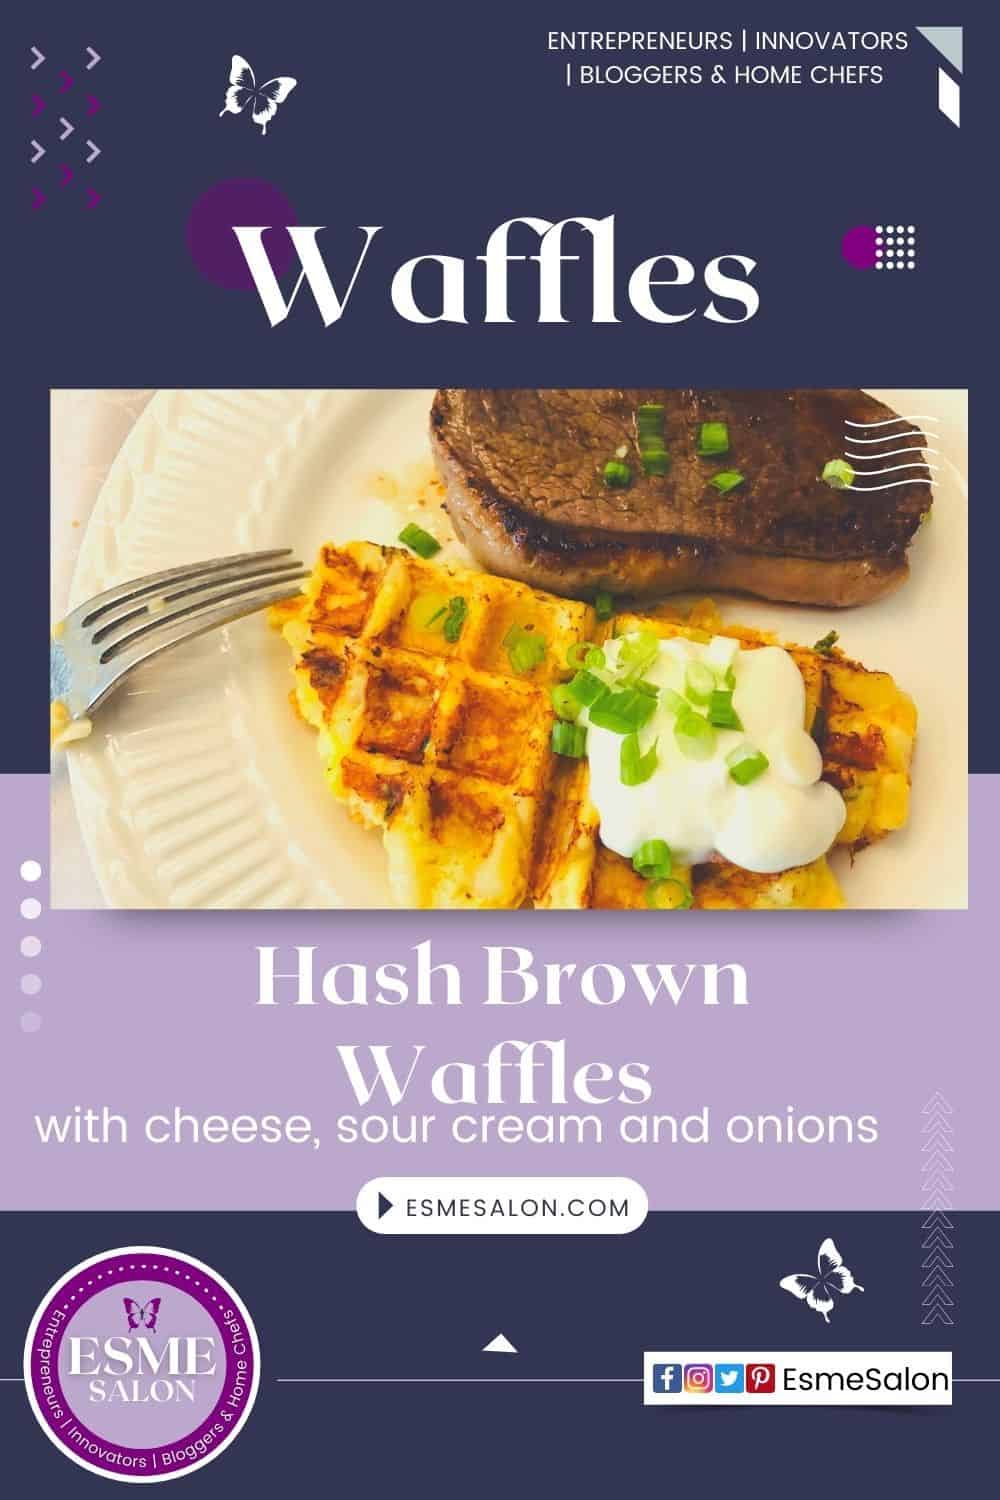 Hash Brown potato cubes baked as a Waffle topped with cream cheese and chives with steak